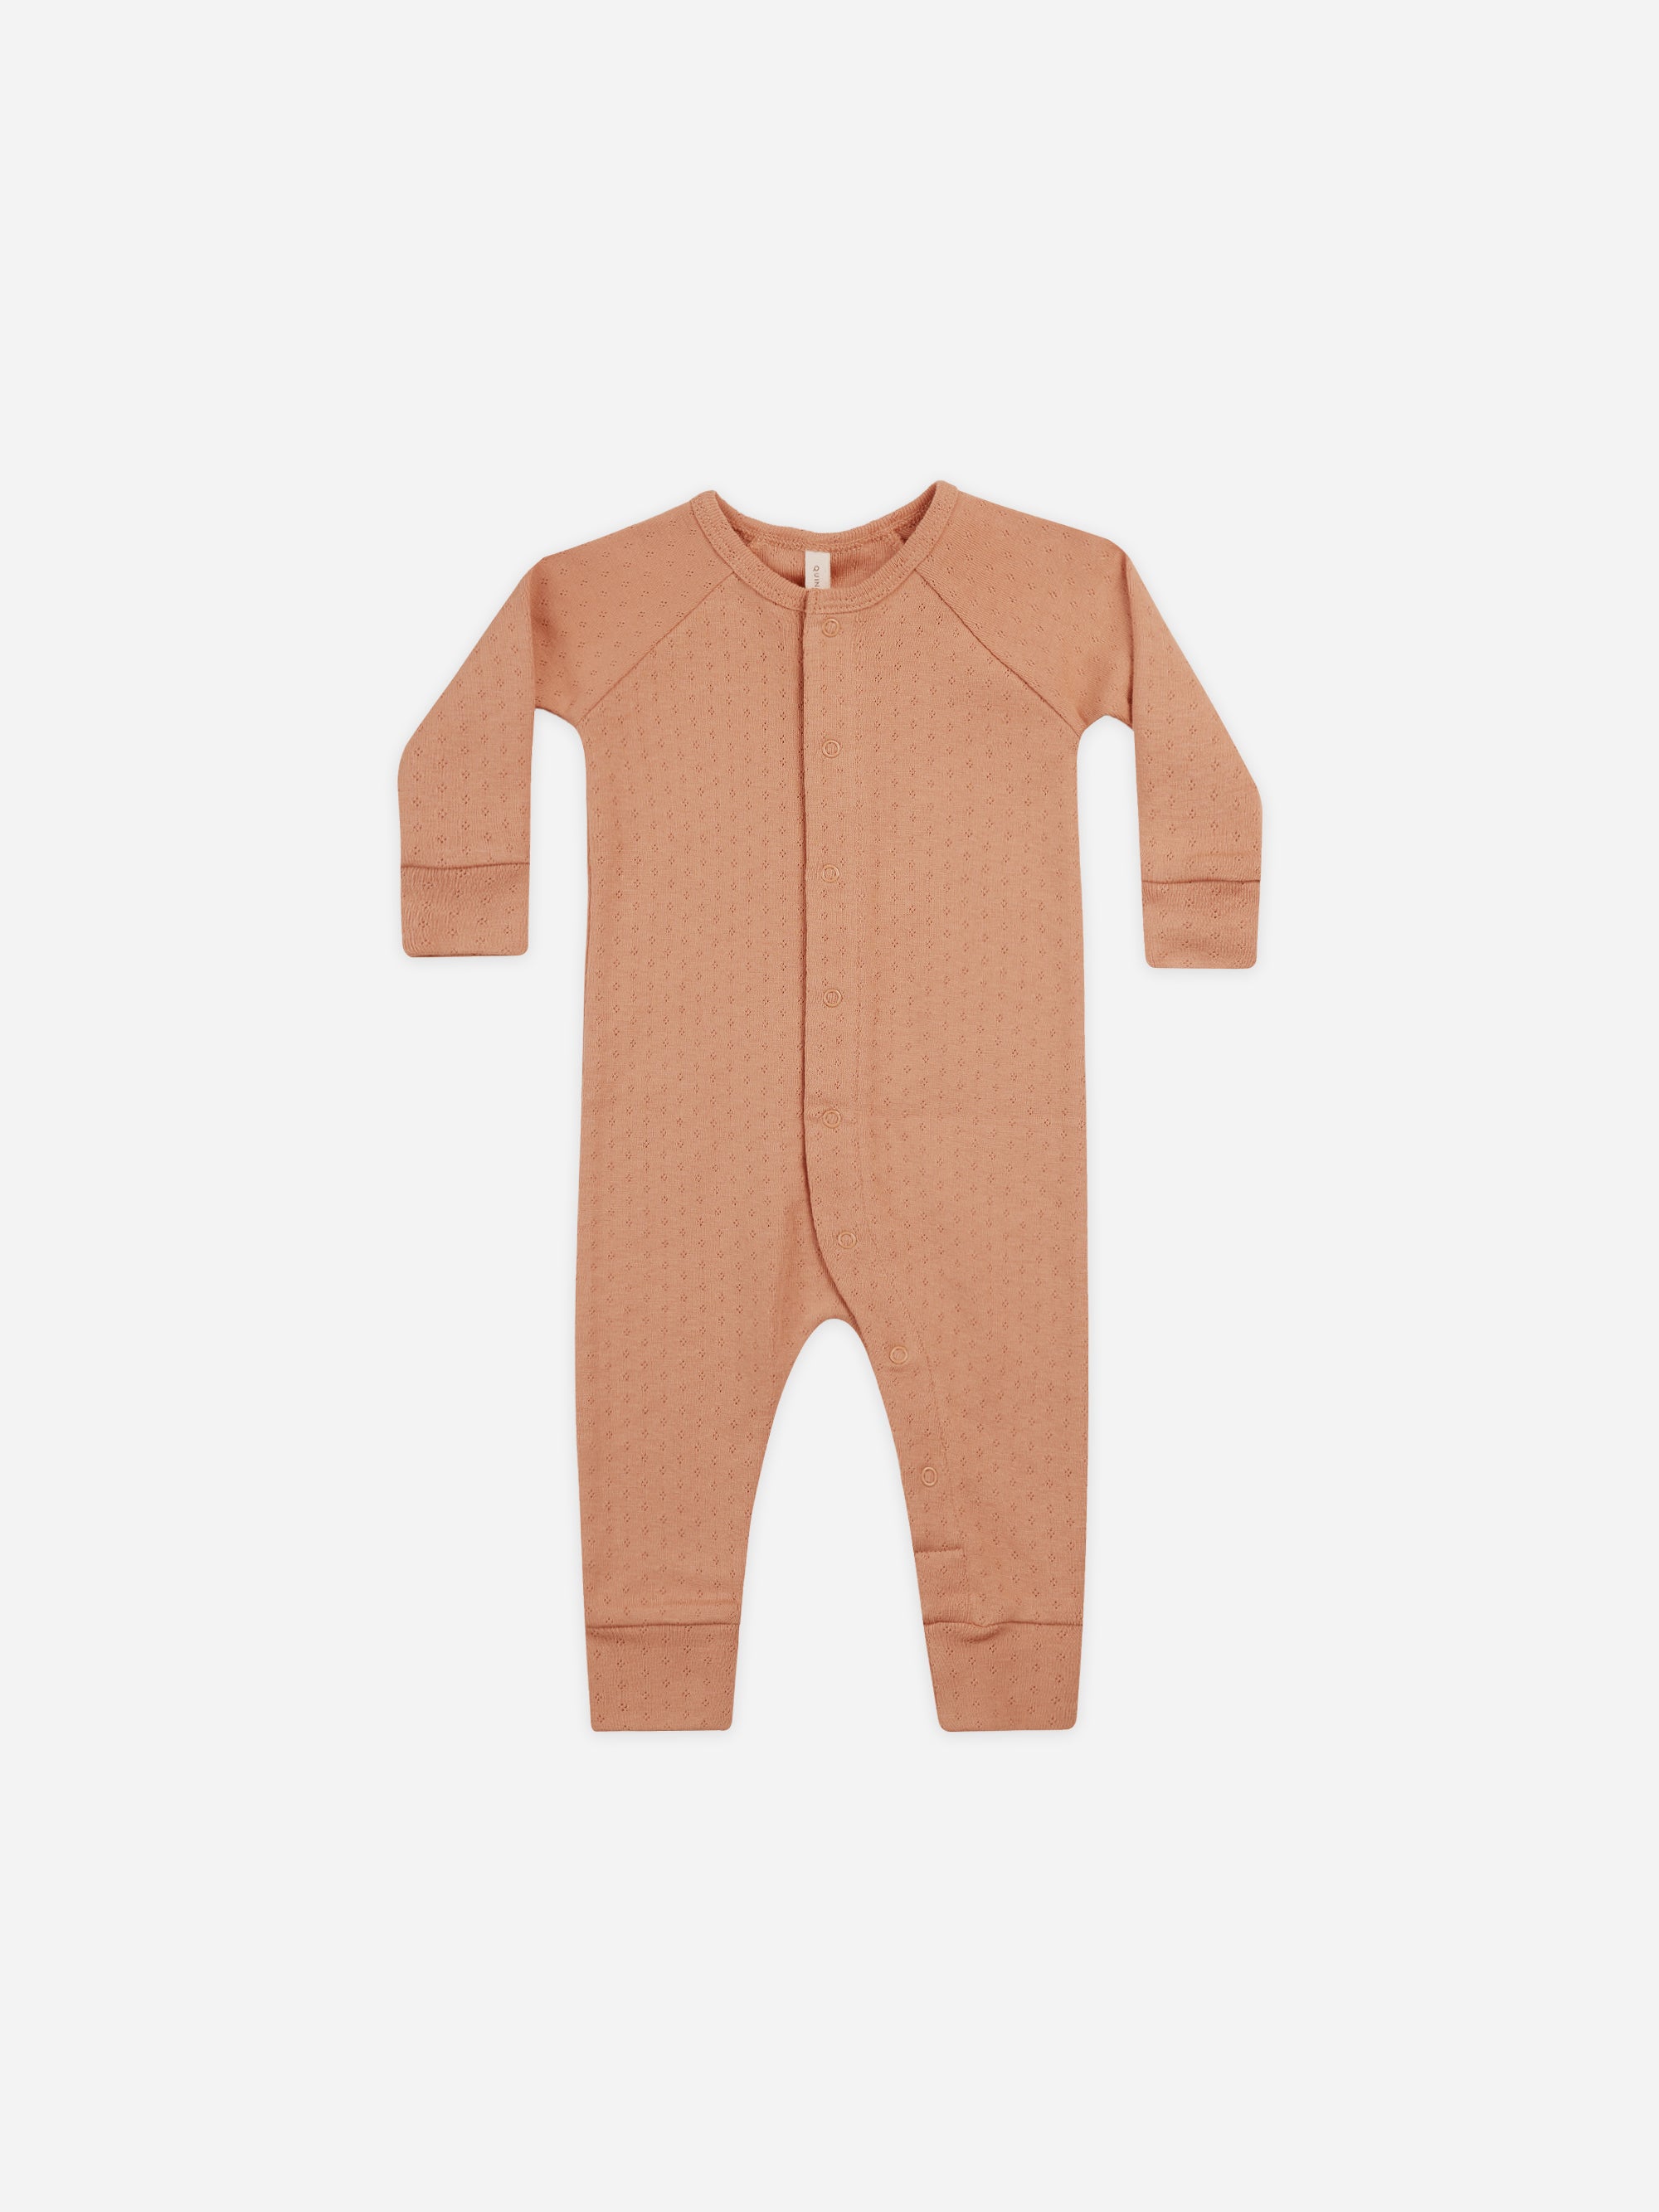 Pointelle Long John || Melon - Rylee + Cru | Kids Clothes | Trendy Baby Clothes | Modern Infant Outfits |